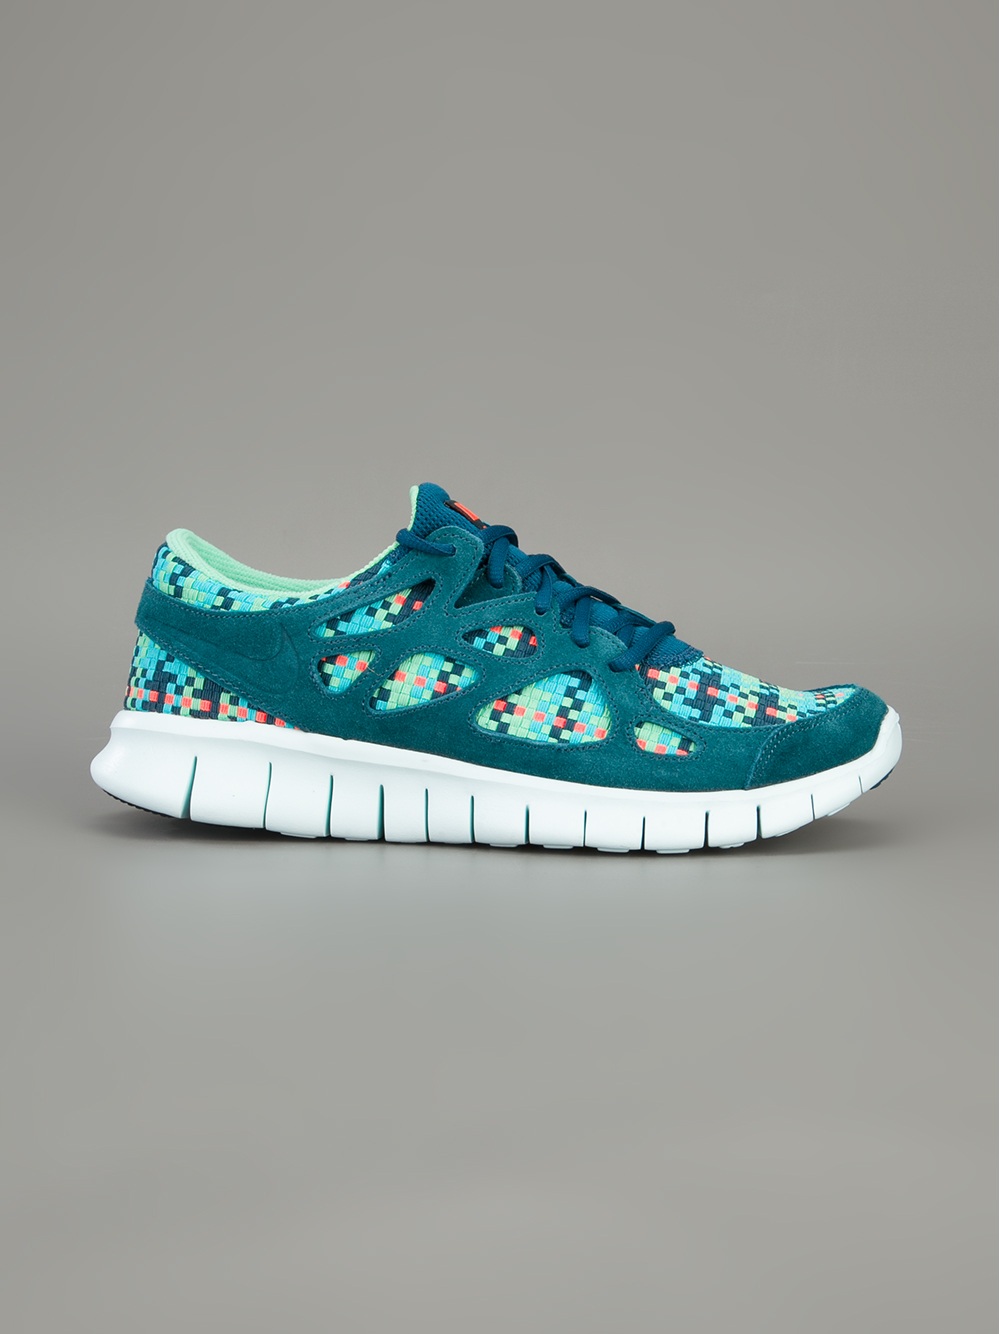 Nike Free Run 2 Woven Trainer in Green for Men - Lyst